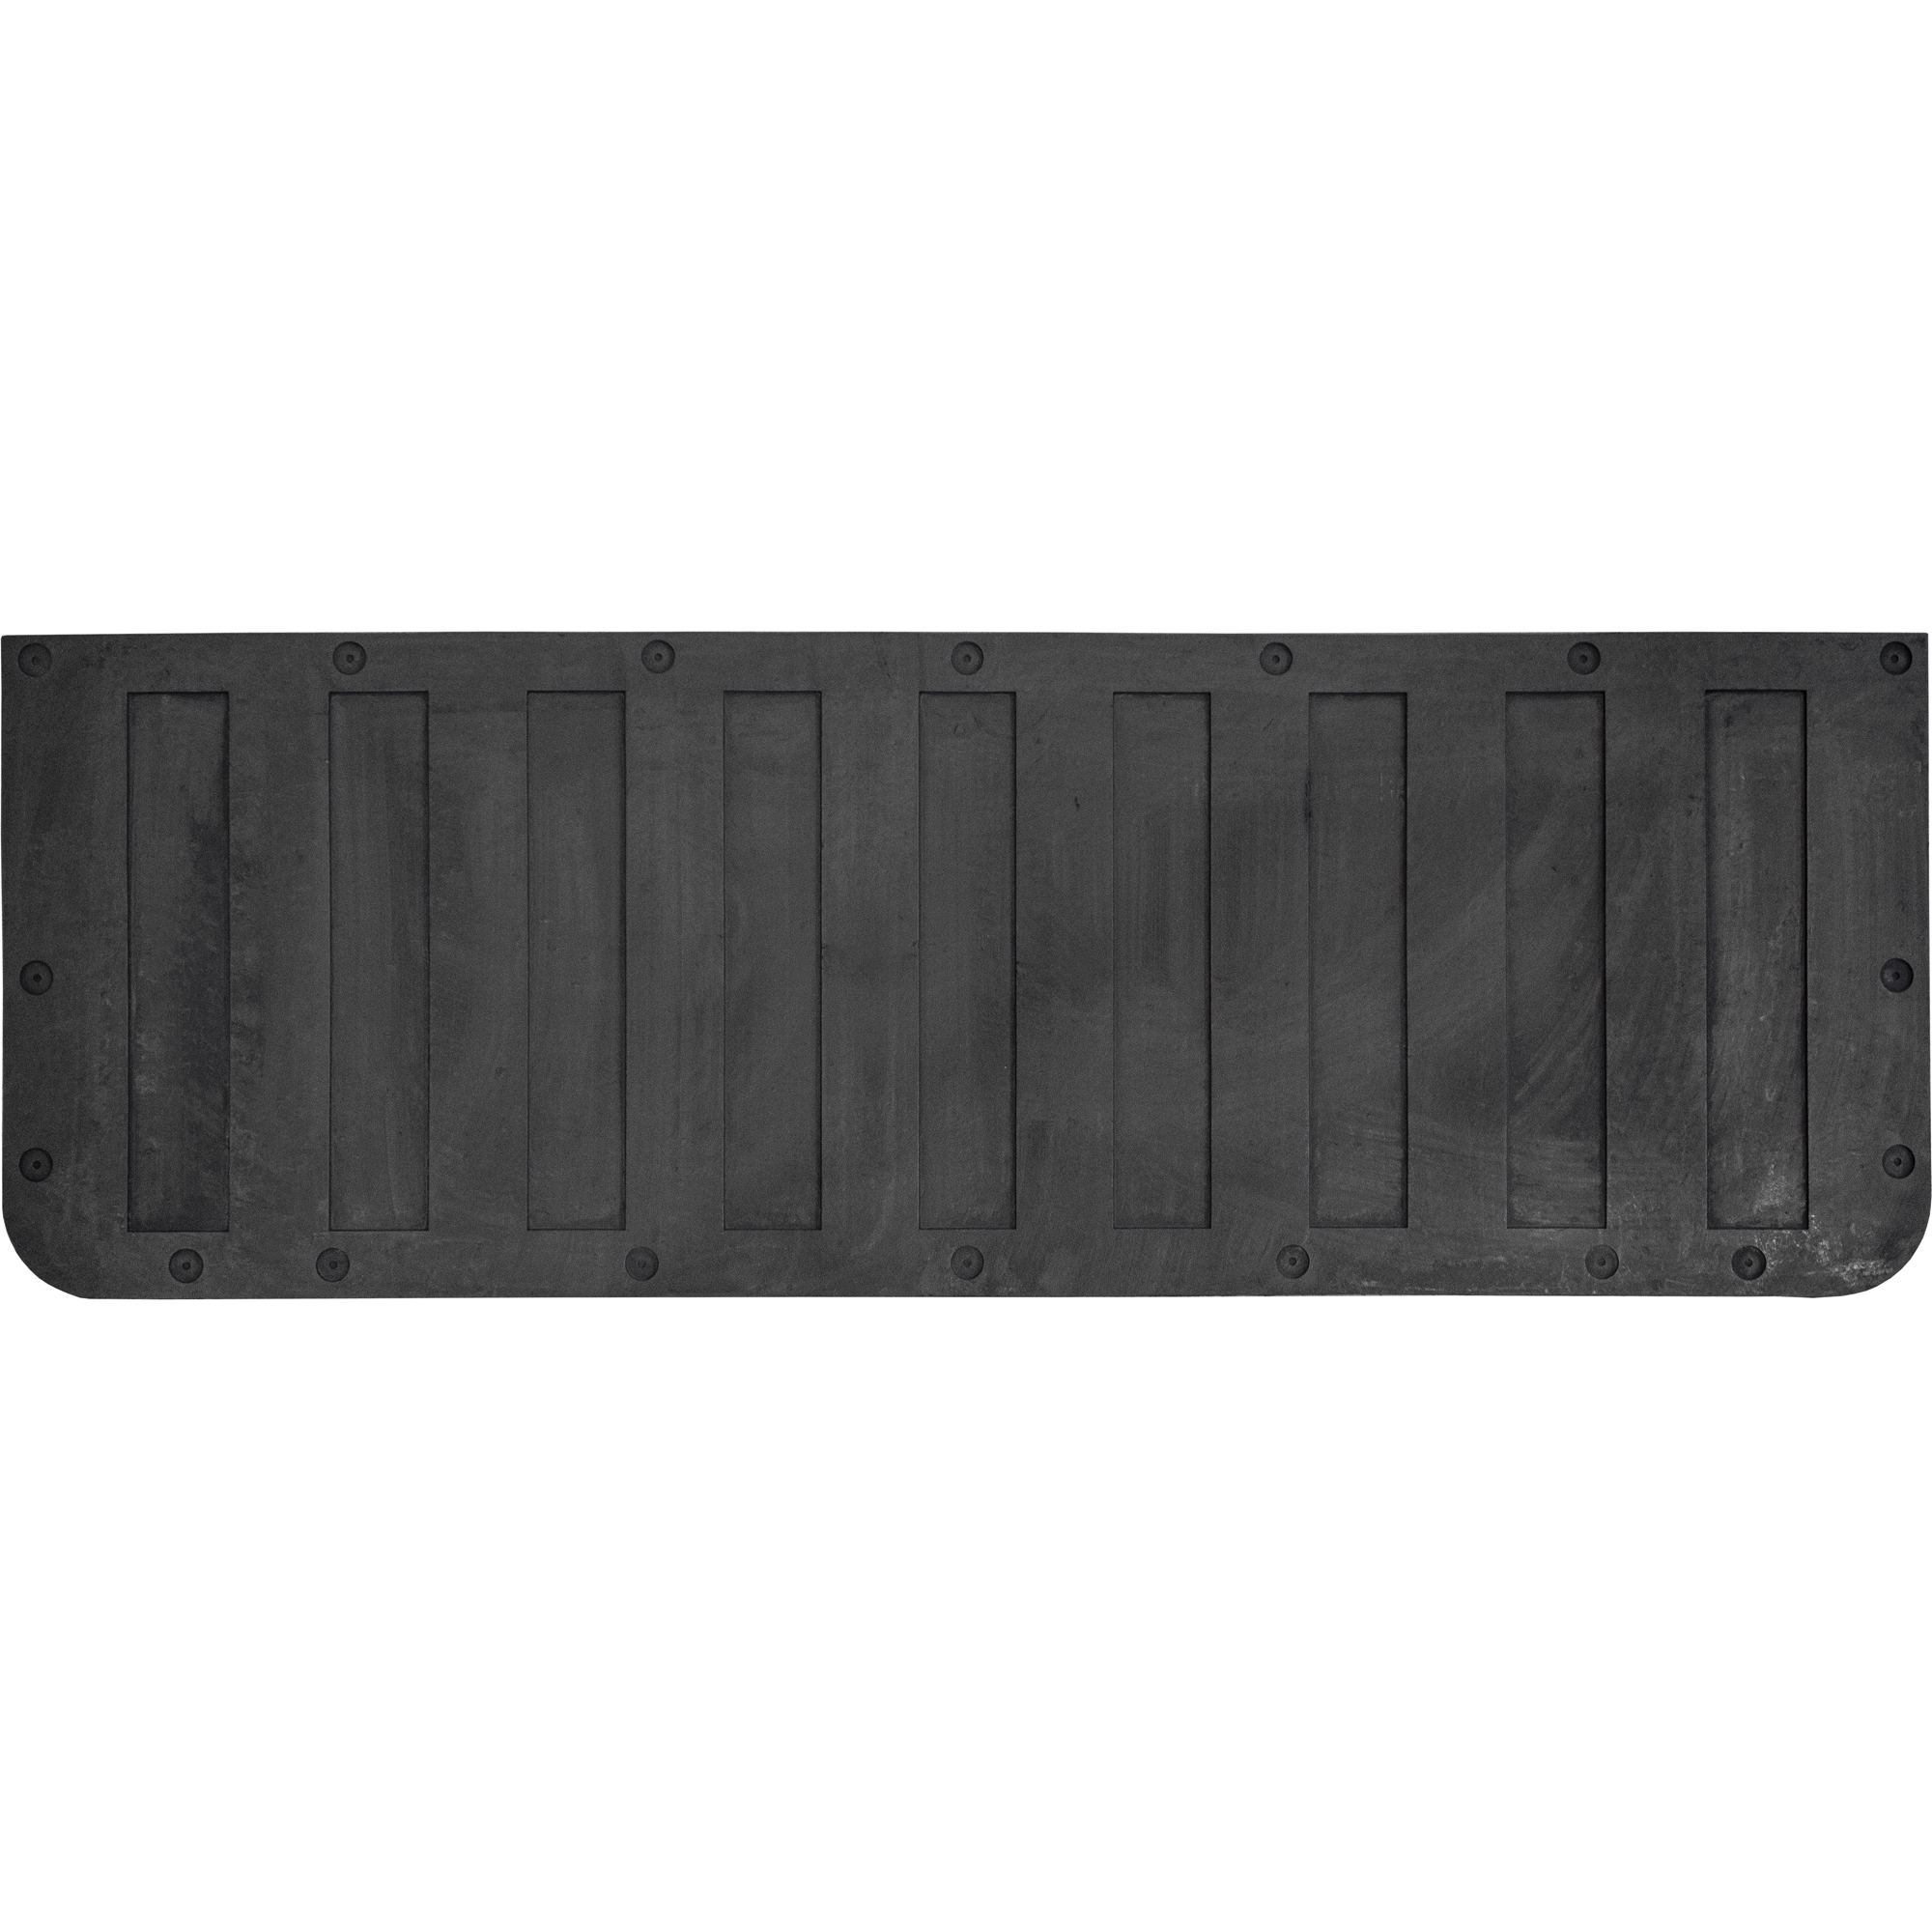 Boomerang Rubber, Chevy/GMC Truck Truck Tailgate Mat, Long/Short Bed, Primary Color Black, Model TM C BAGGED